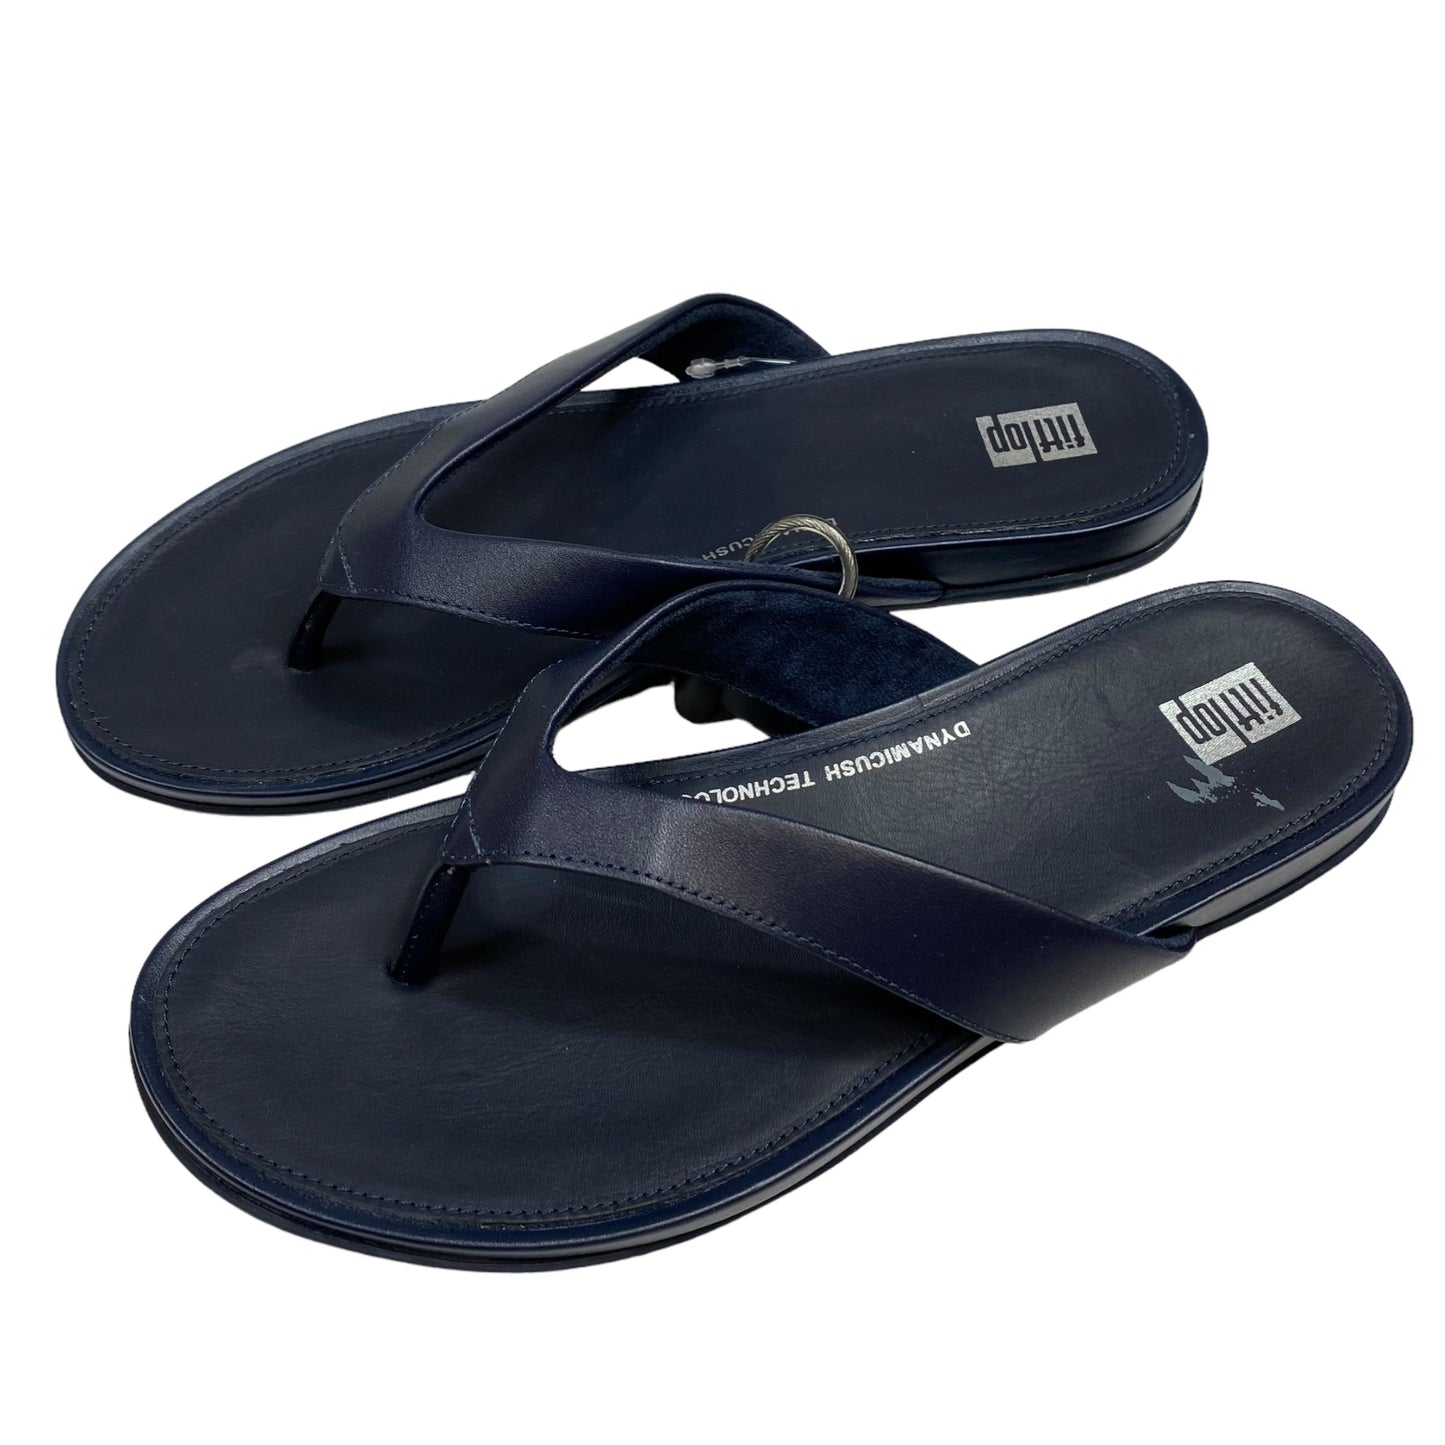 Sandals Flip Flops By Fitflop  Size: 7